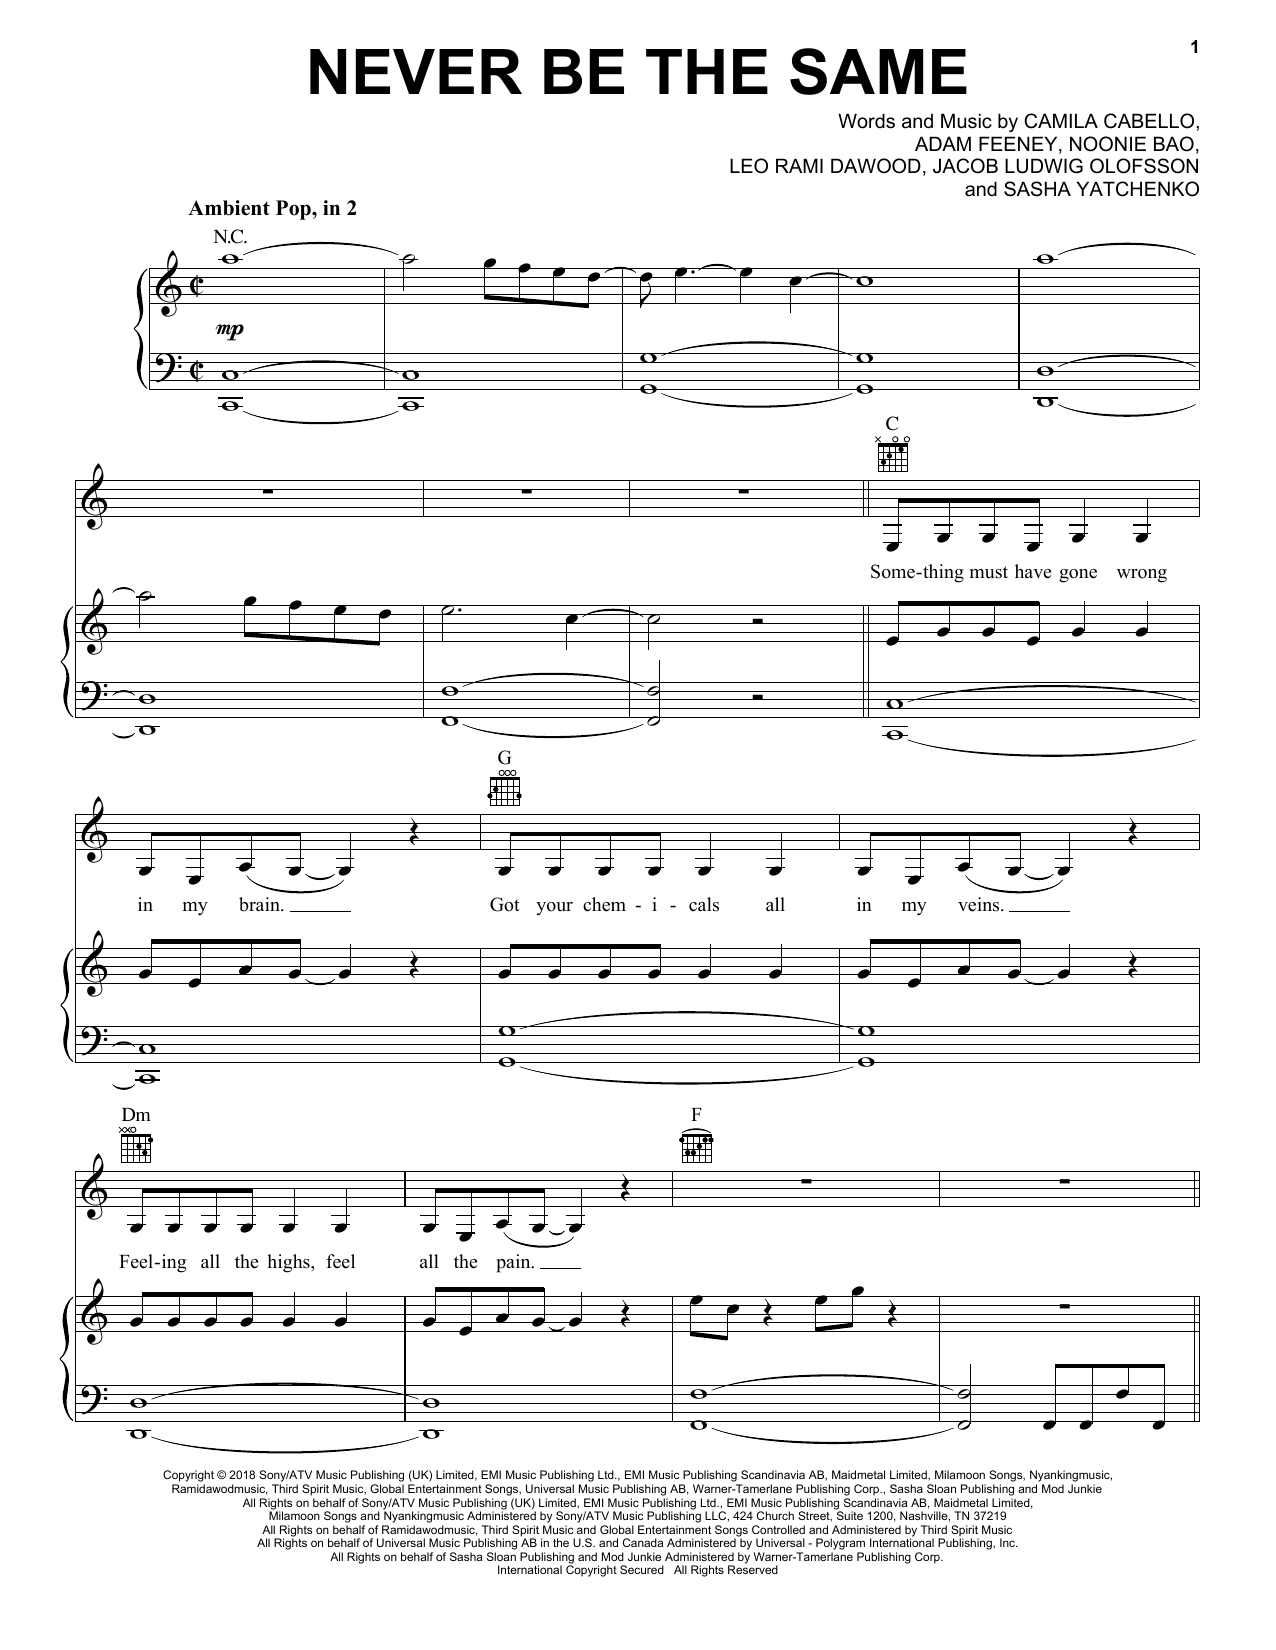 Download Camila Cabello Never Be The Same Sheet Music